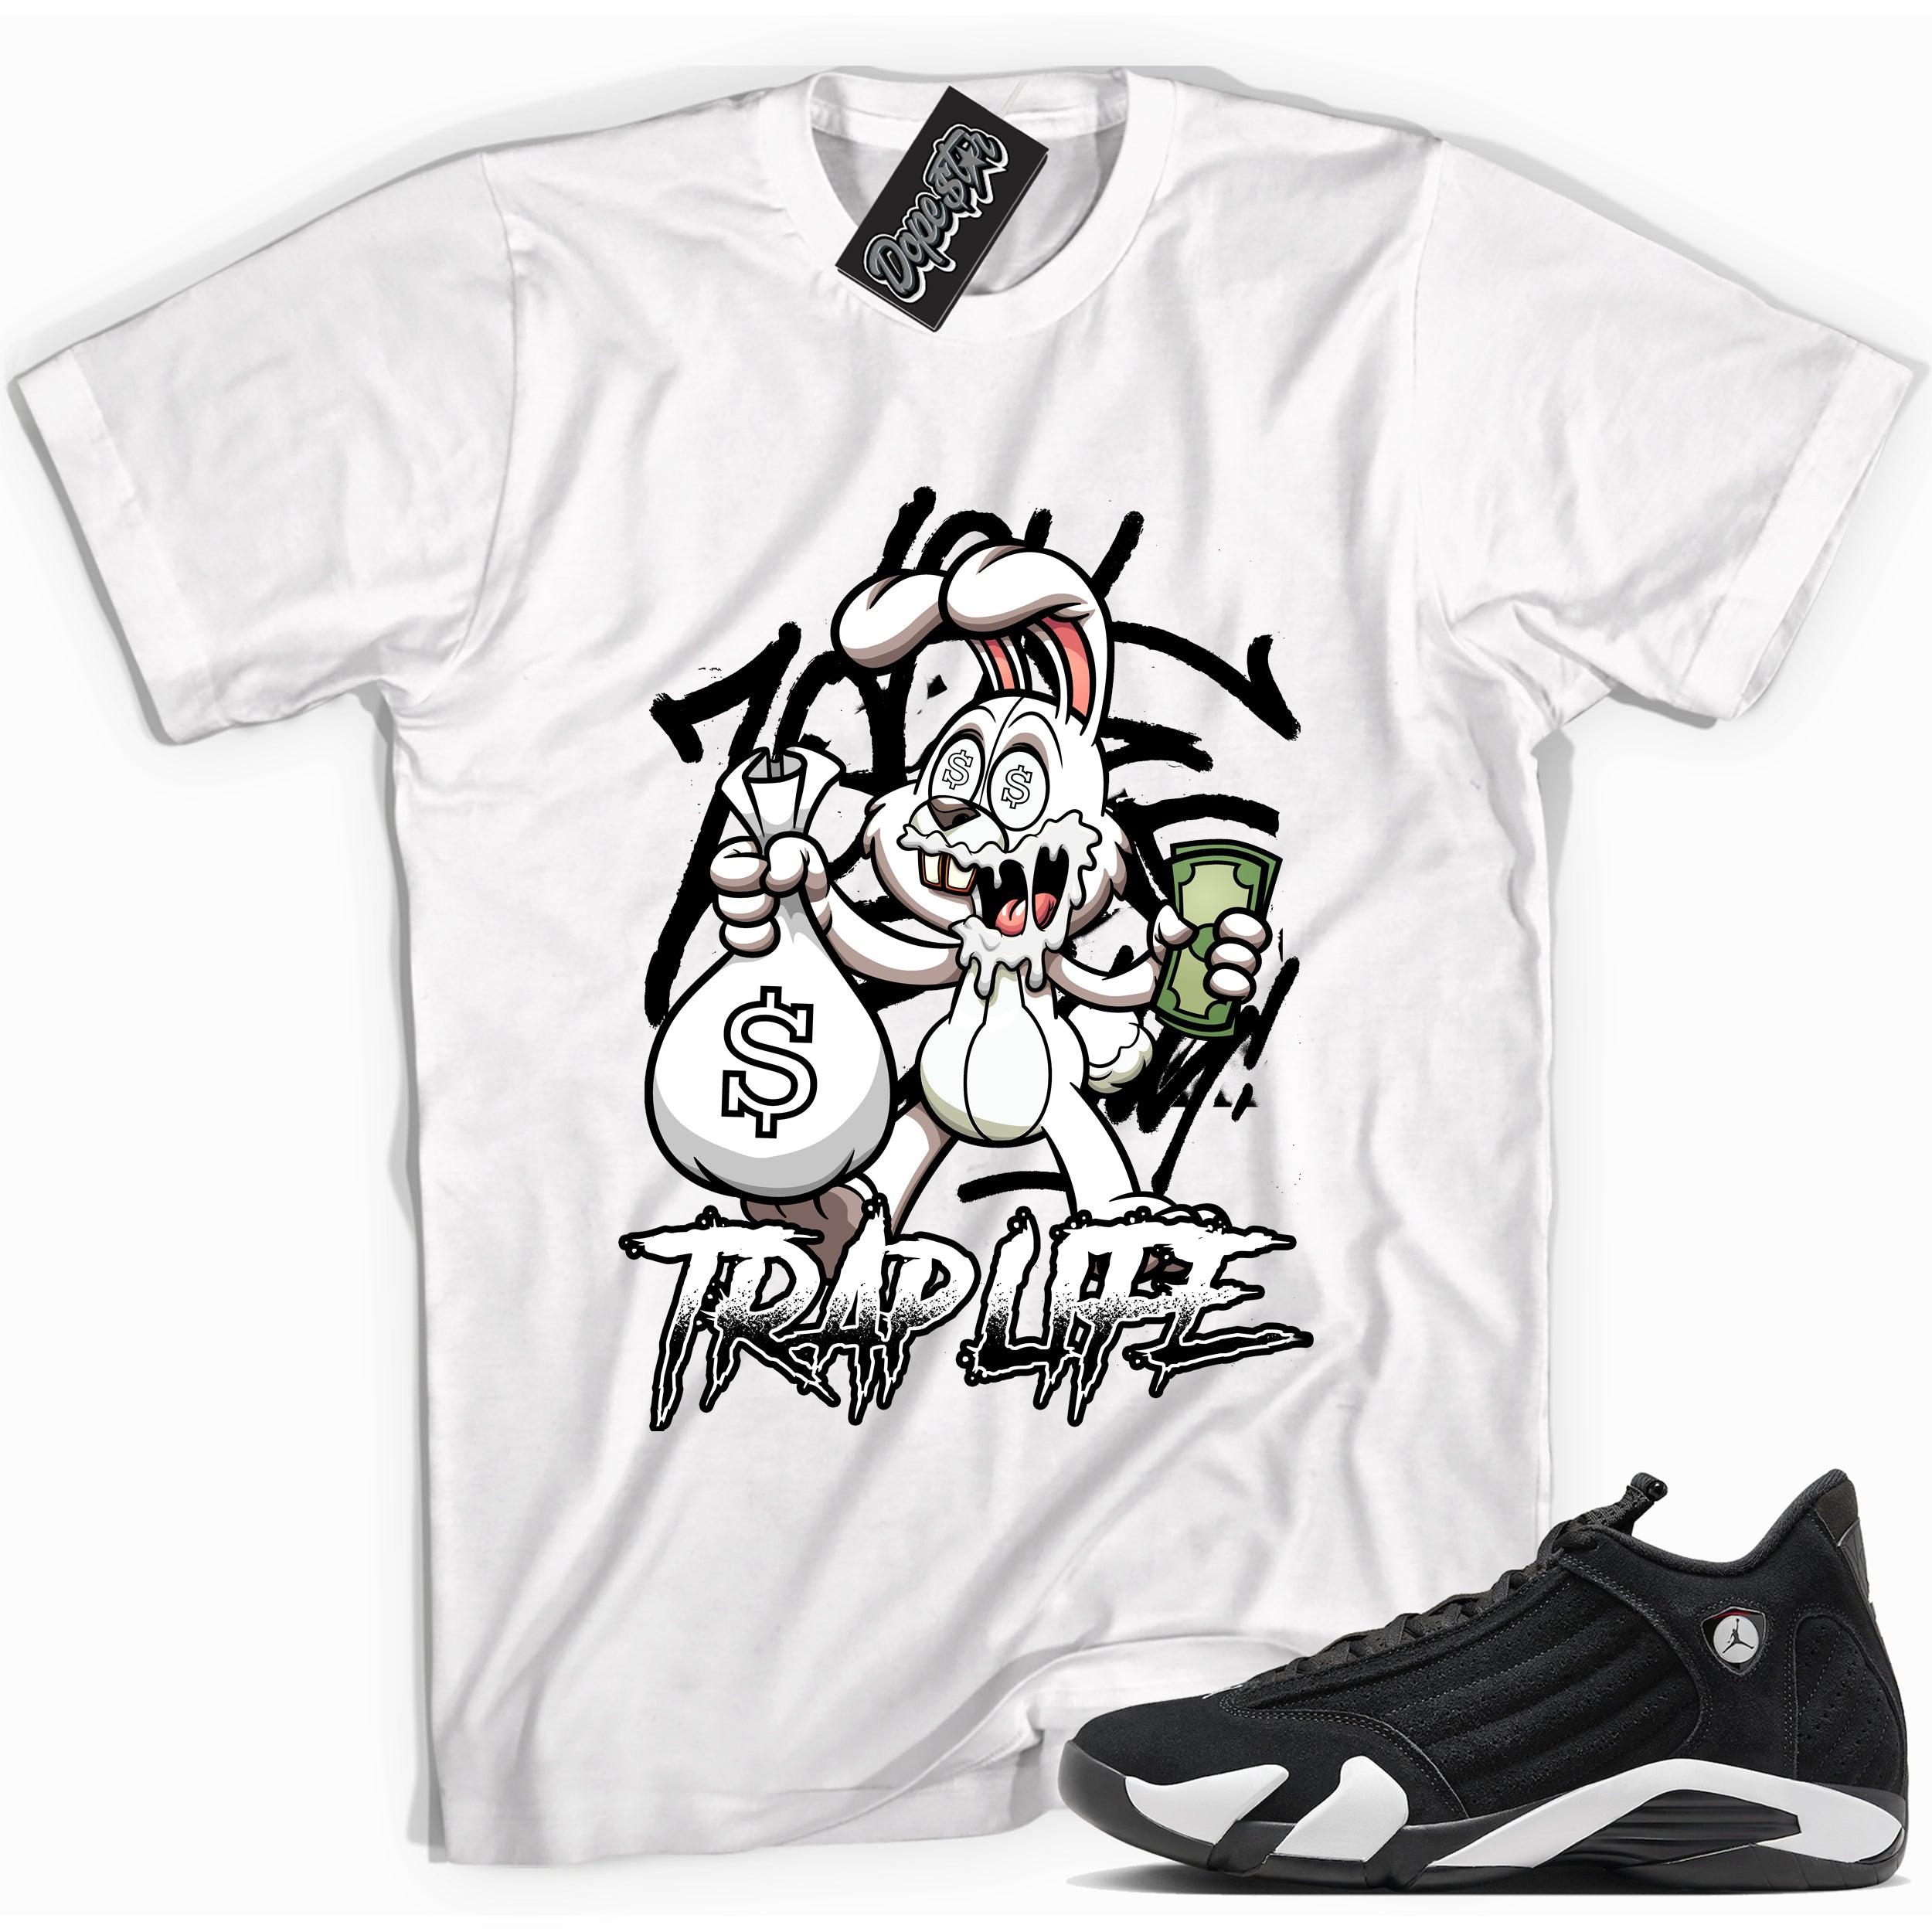 Cool White graphic tee with “ Trap life ” print, that perfectly matches Air Jordan 14 Black & White sneakers 